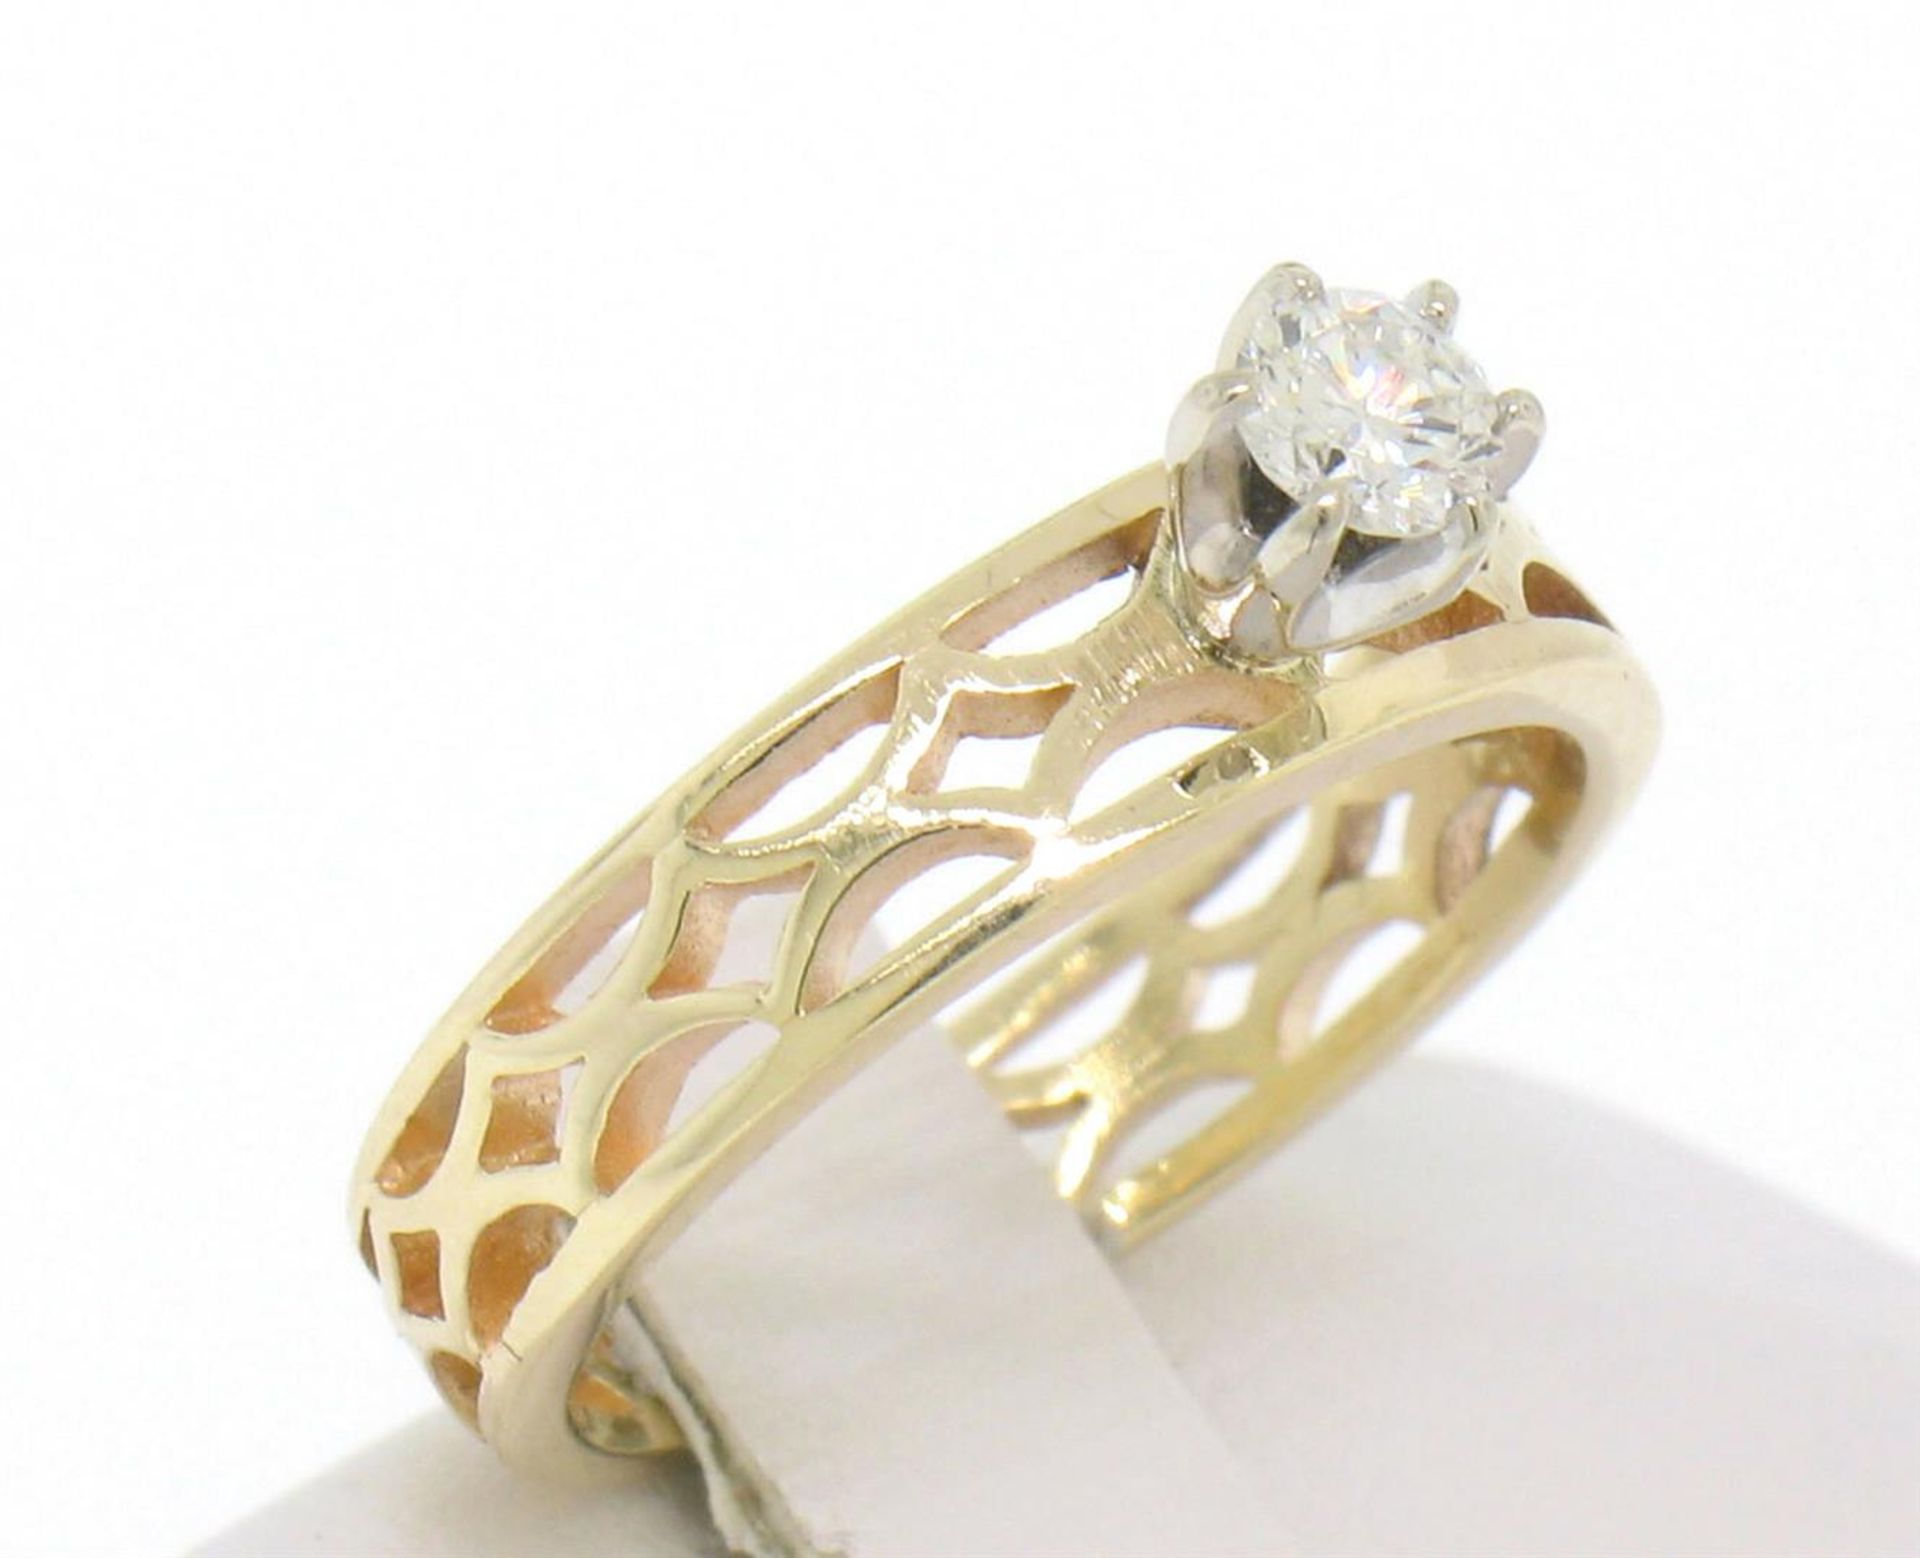 Estate 14k Solid Yellow Gold Solitaire Diamond Ring with Pierced Open Work Look - Image 2 of 5